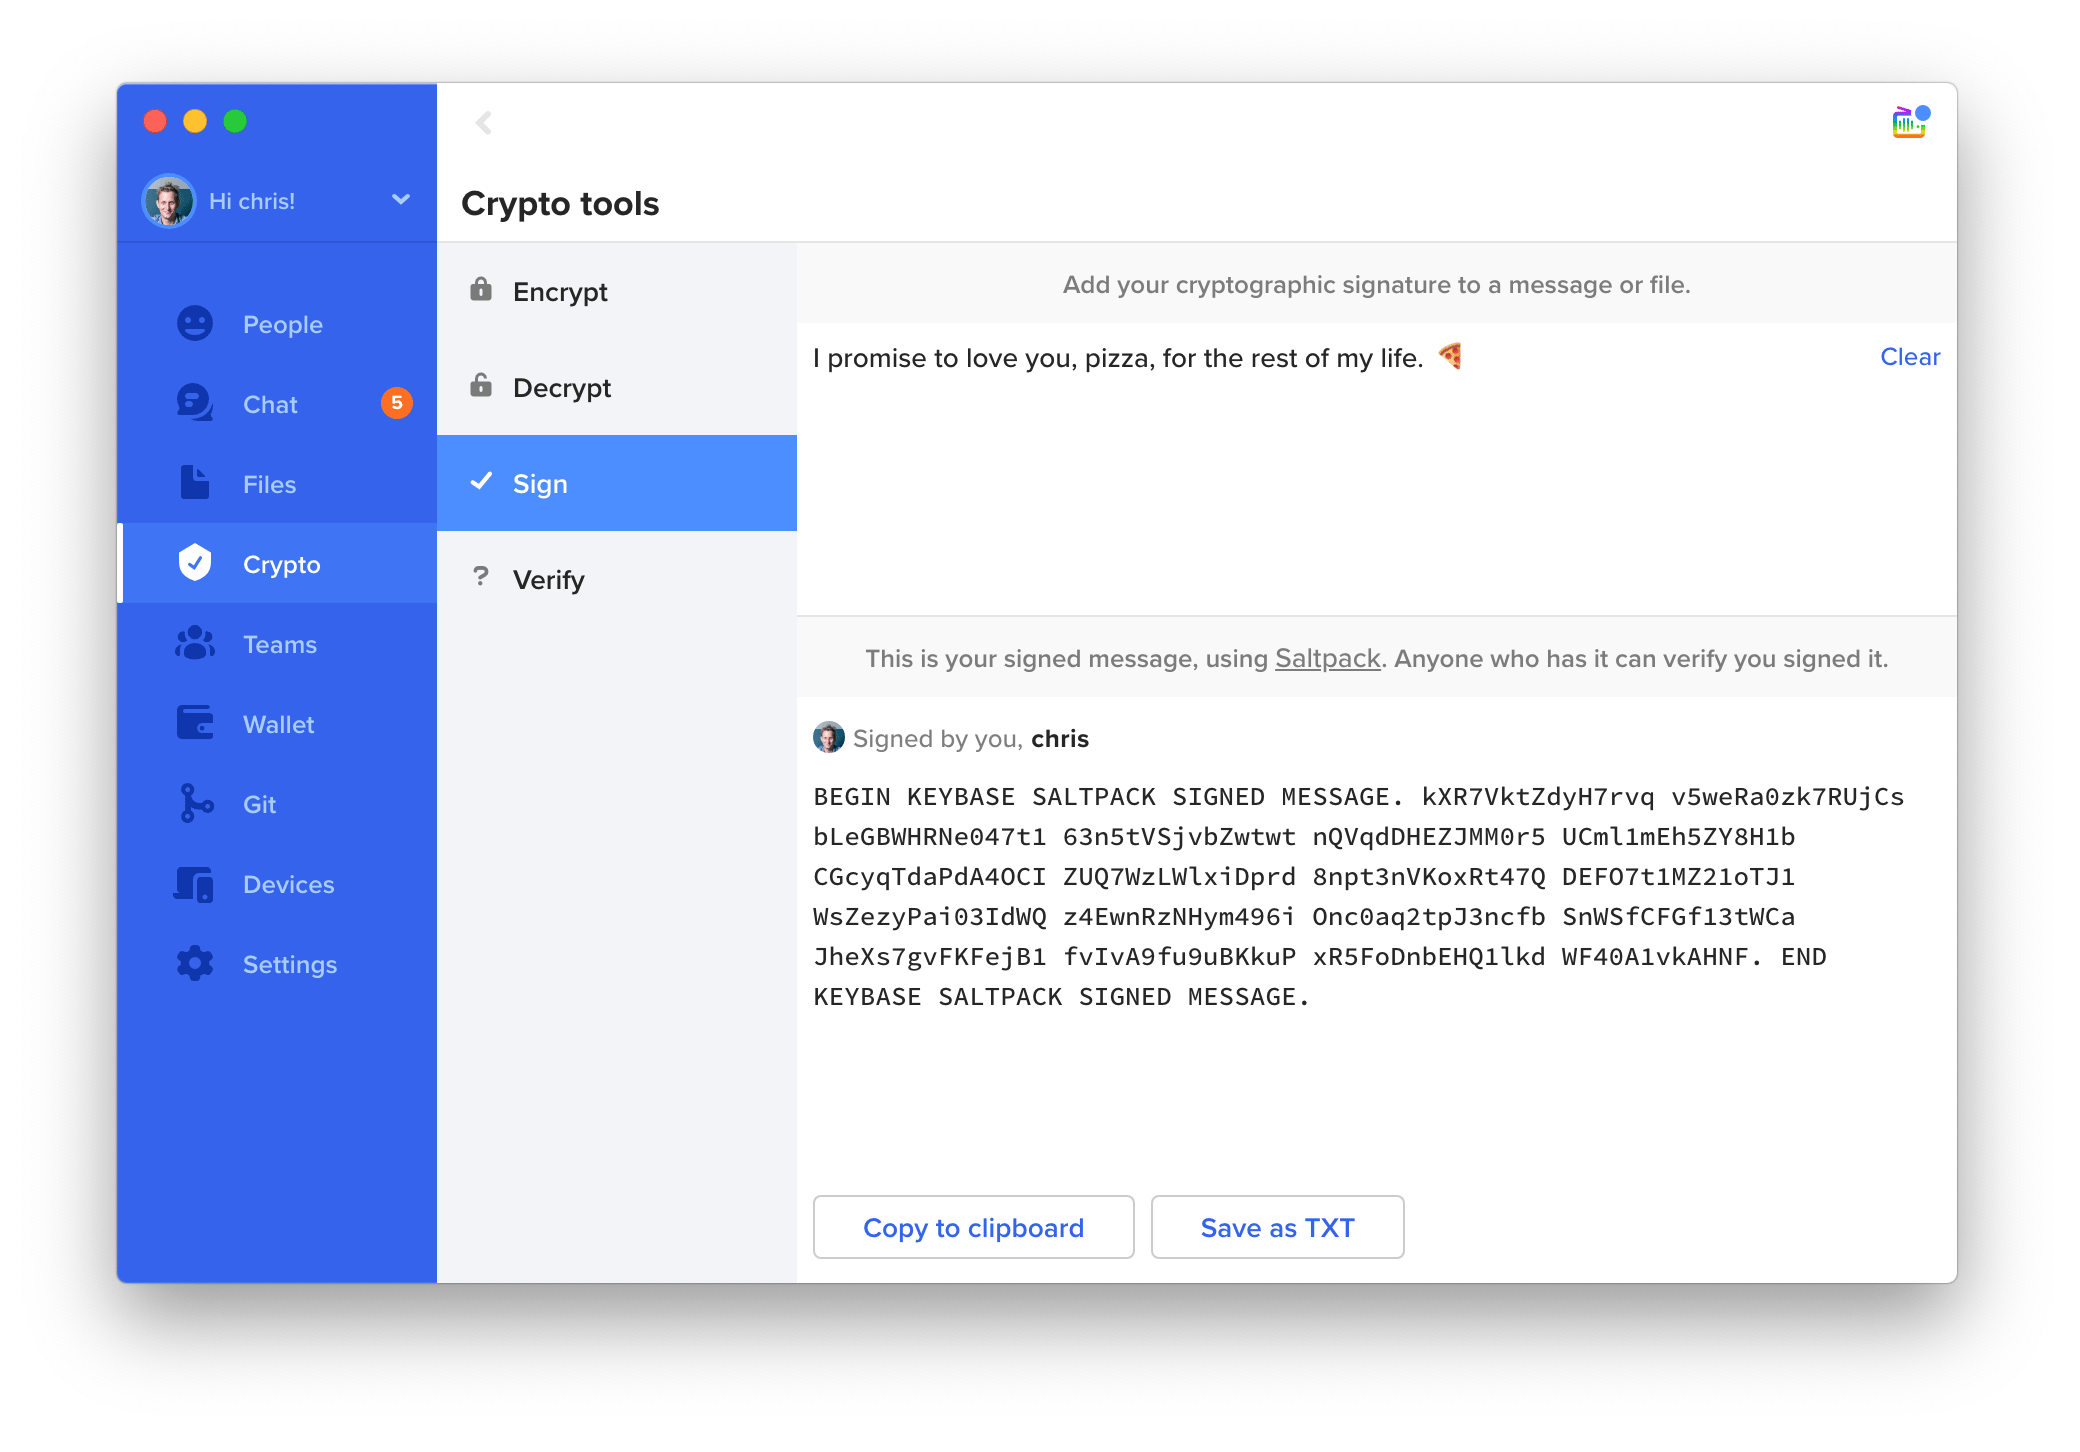 Keybase app showing @chris signing 'I promise to love you, pizza, for the rest of my life'